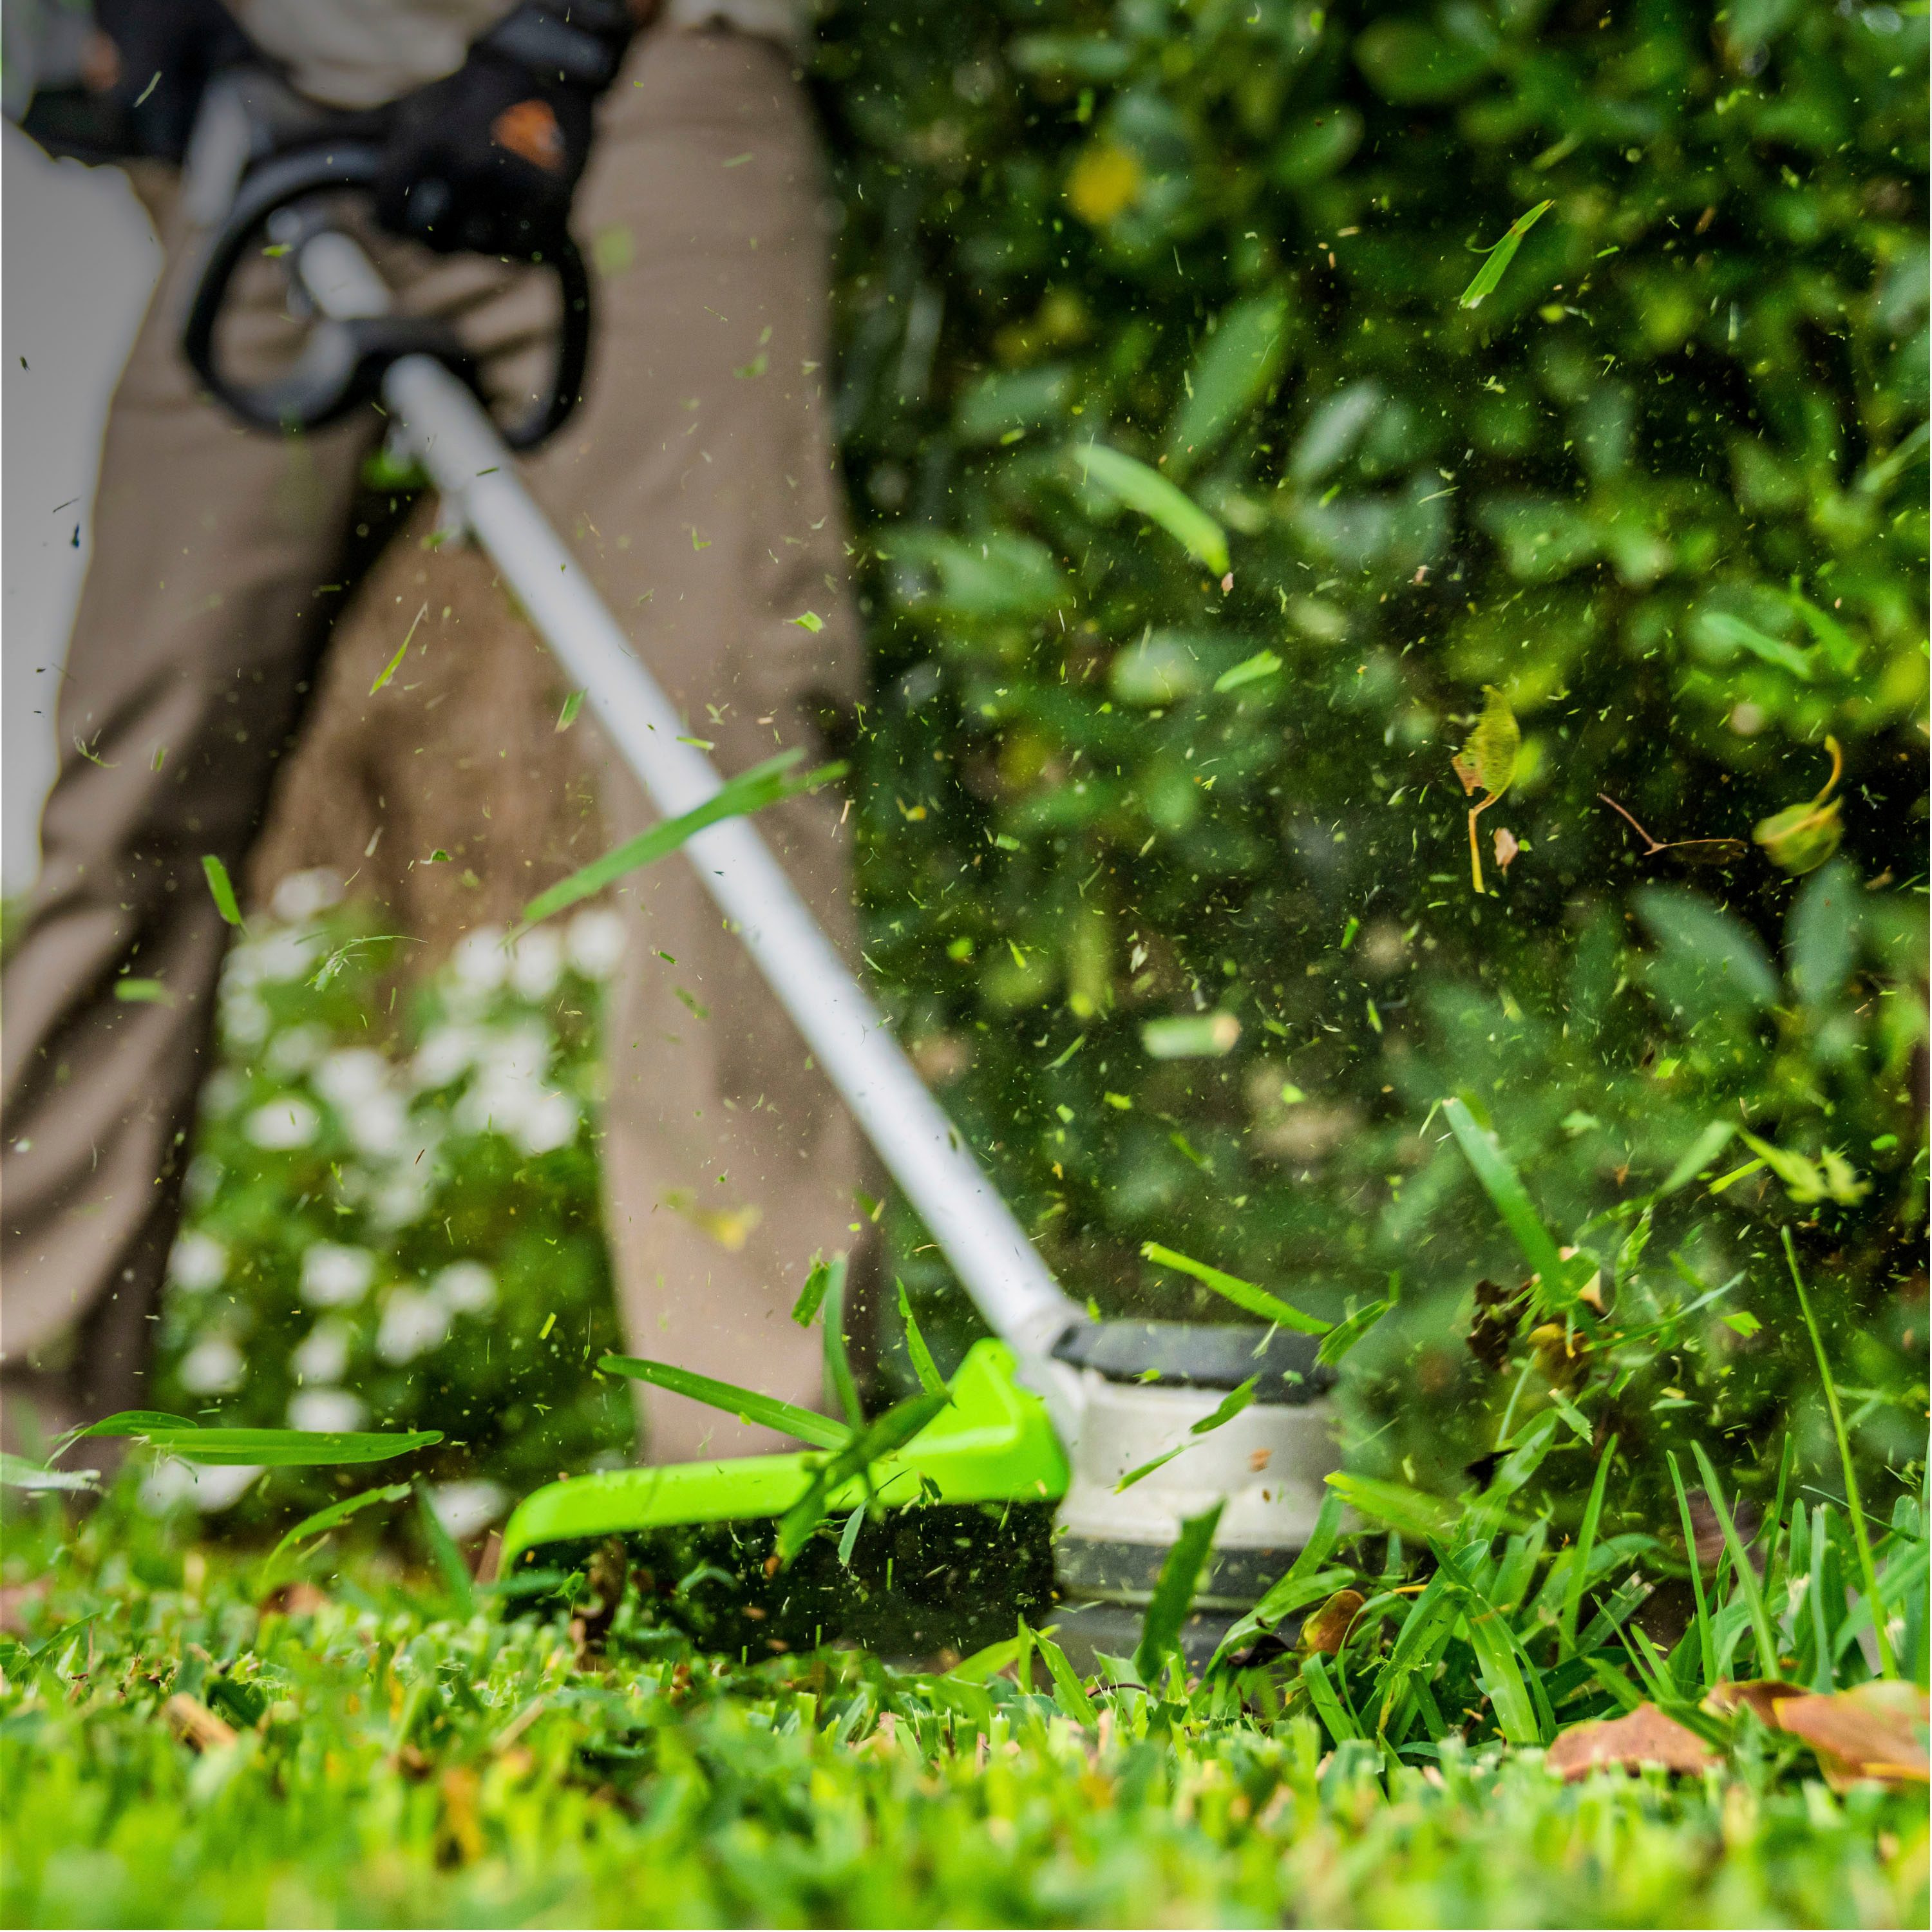 Left View: Greenworks - 80V 16" Cutting Diameter  Brushless Straight Shaft Grass Trimmer 2.0 Ah Battery and Rapid Charger - Black/Green